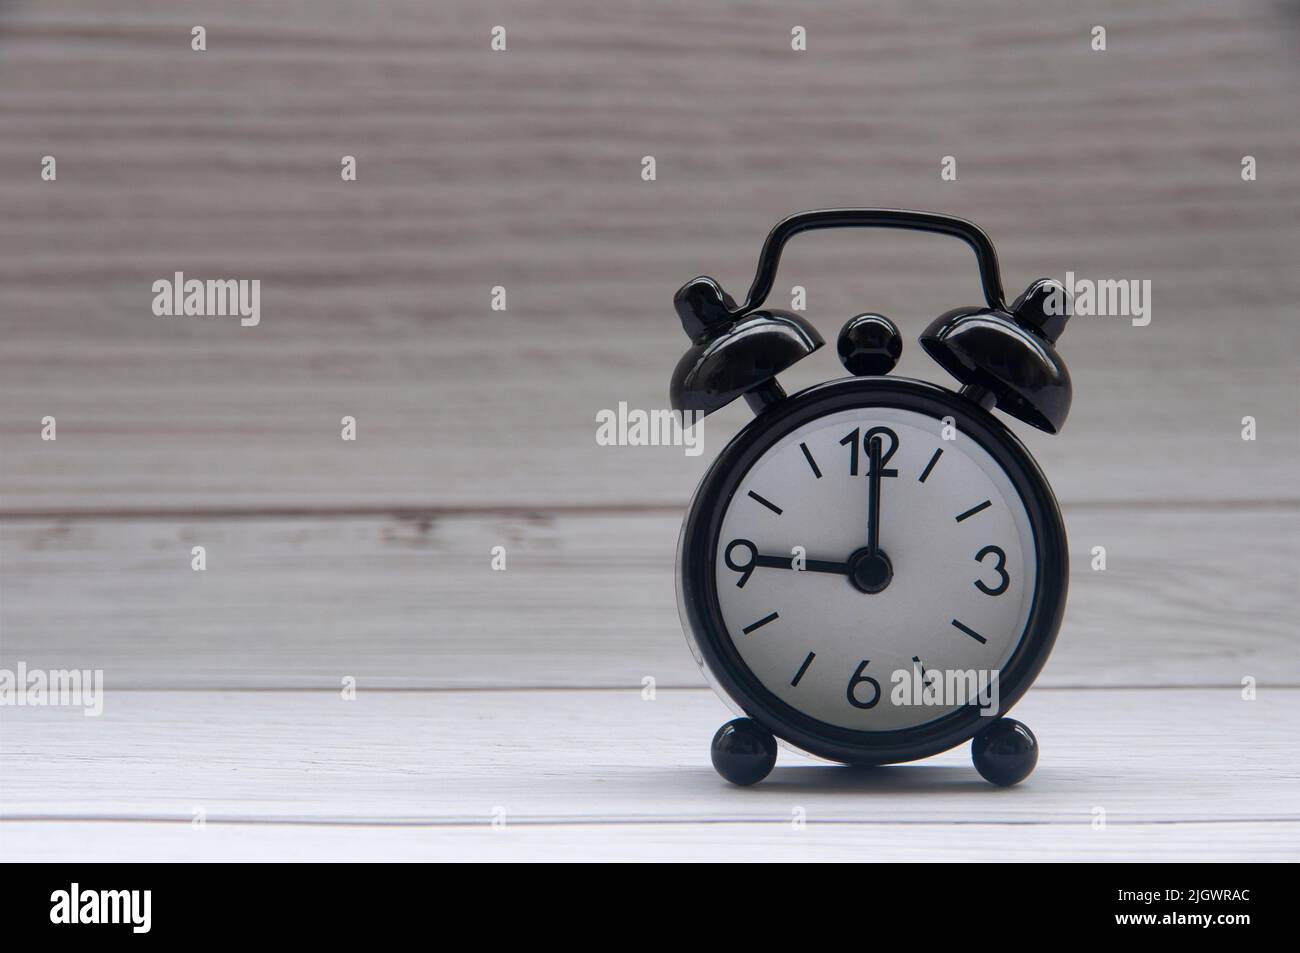 Black alarm clock isolated on wooden cover background. The clock set at 9 o'clock. Copy space. Stock Photo